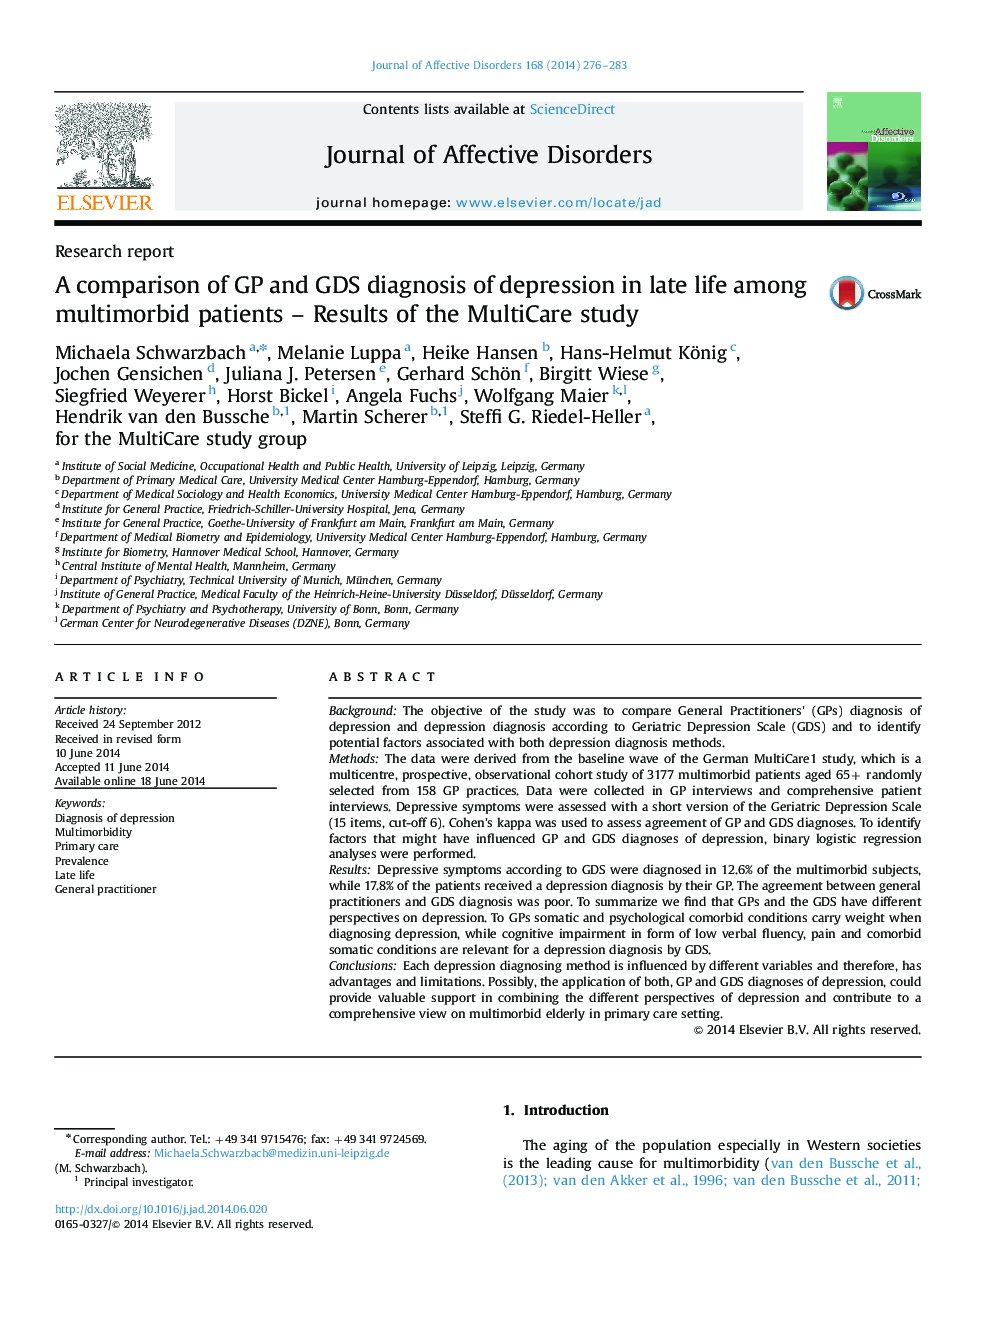 A comparison of GP and GDS diagnosis of depression in late life among multimorbid patients - Results of the MultiCare study